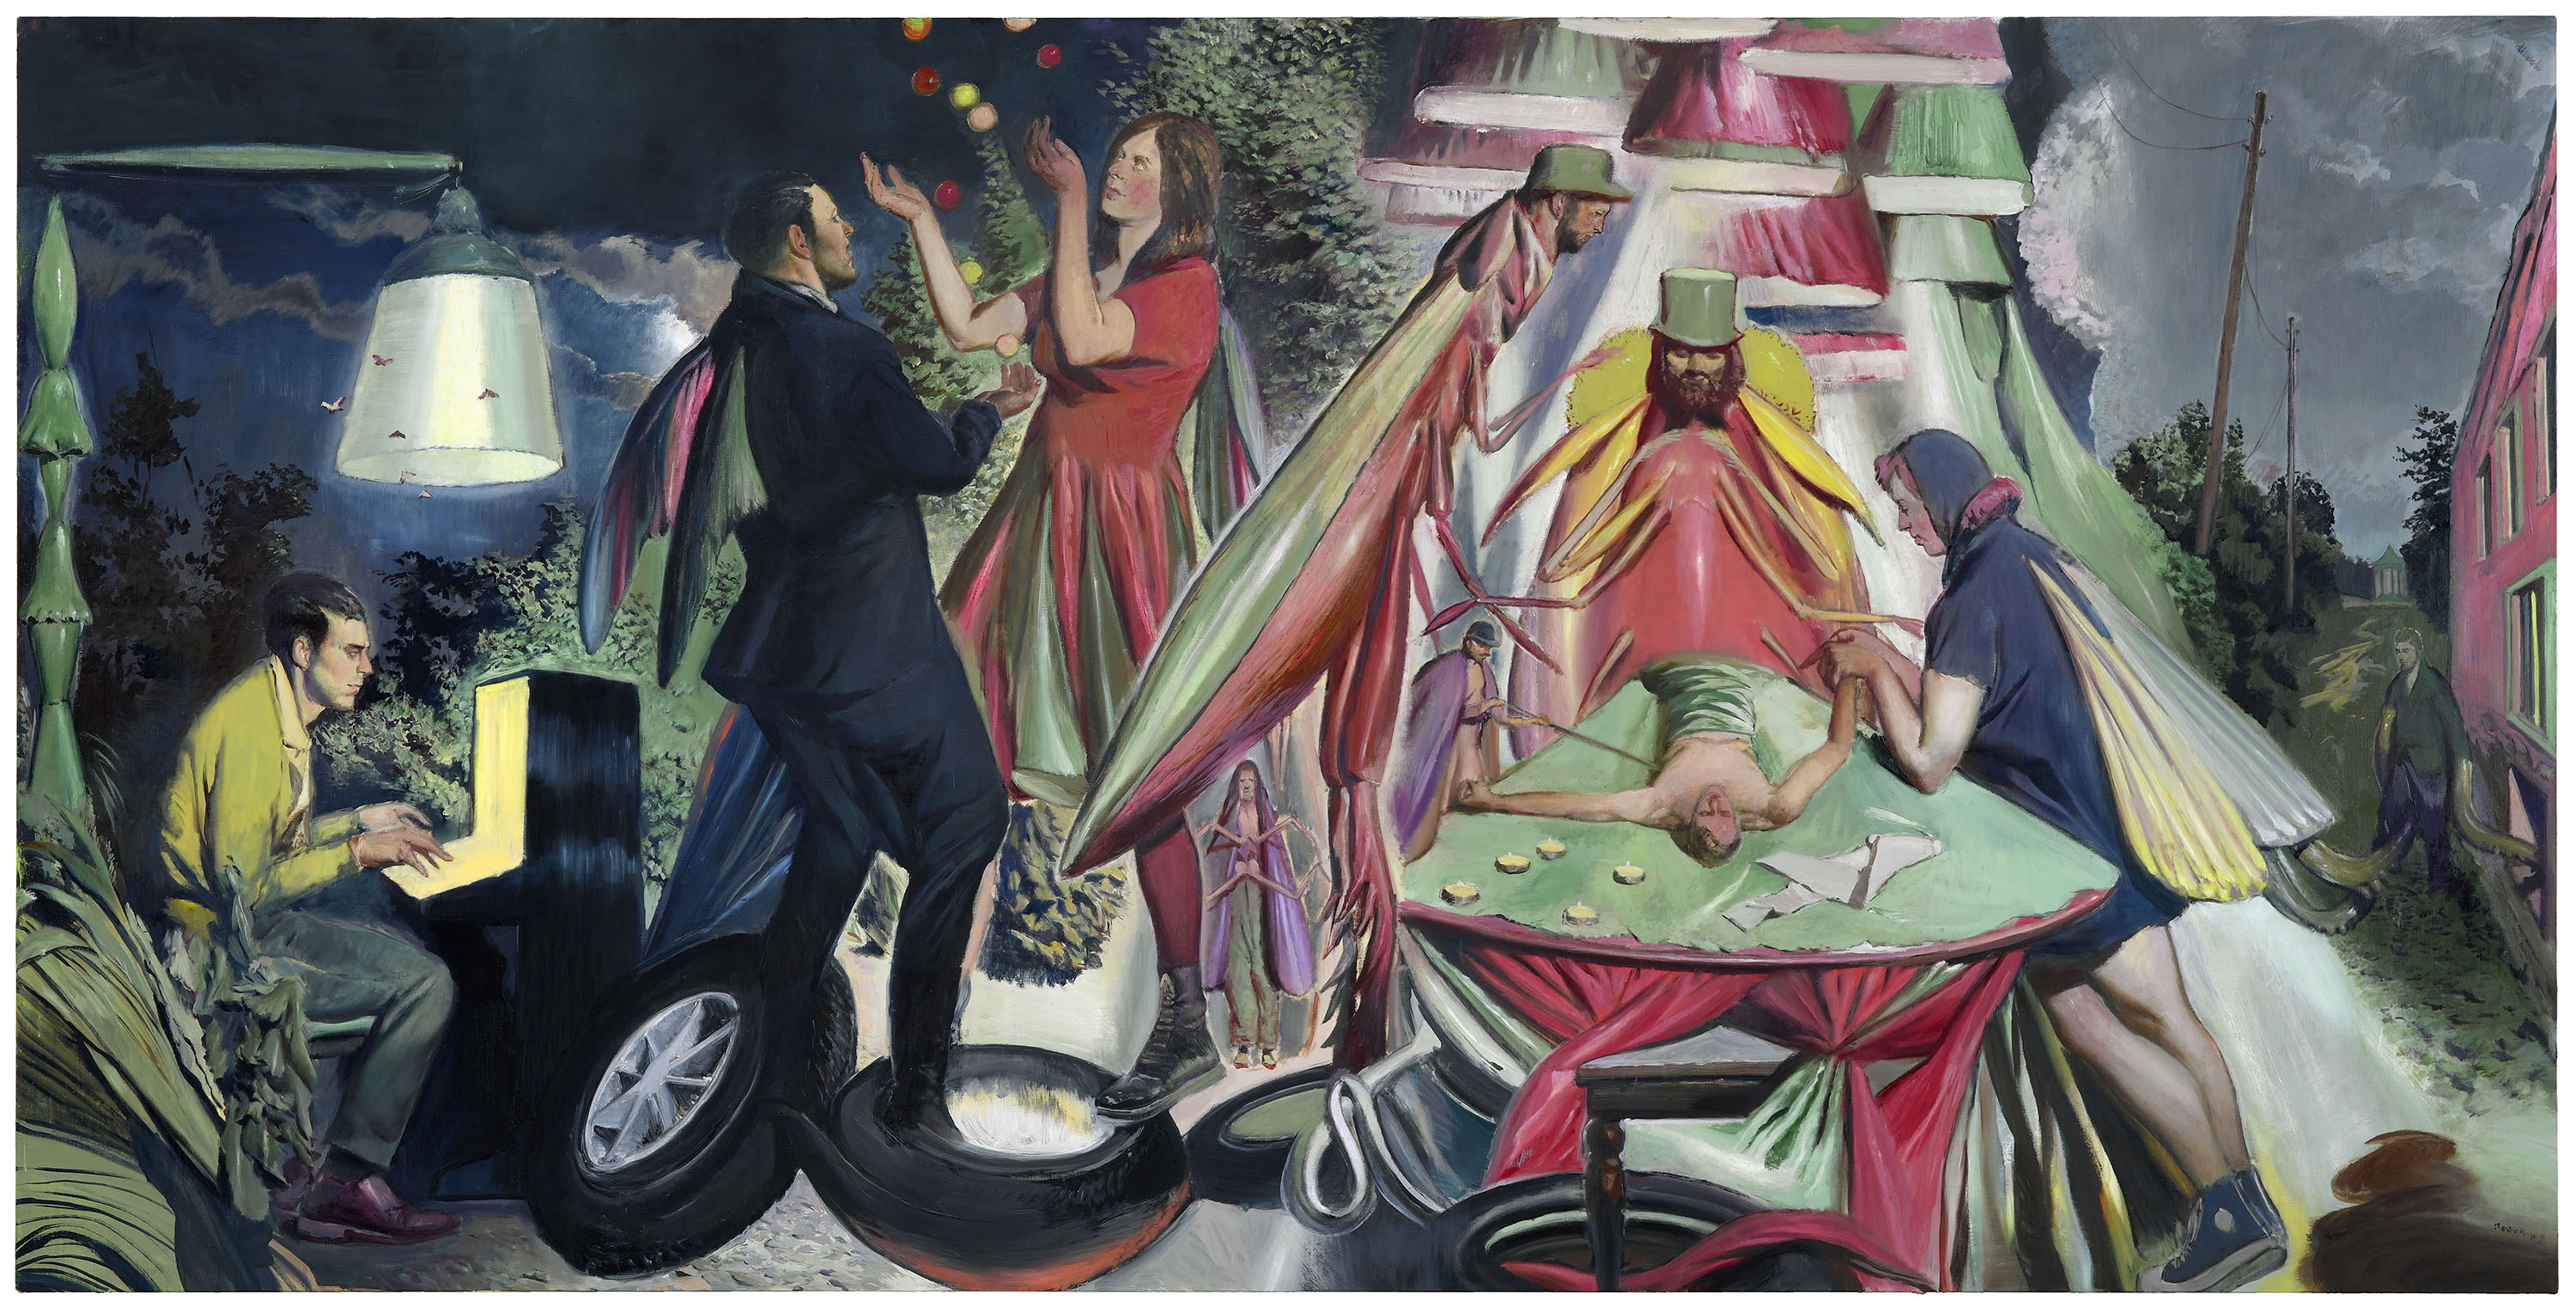 A painting by Neo Rauch, titled Die Wandlung, dated 2019.